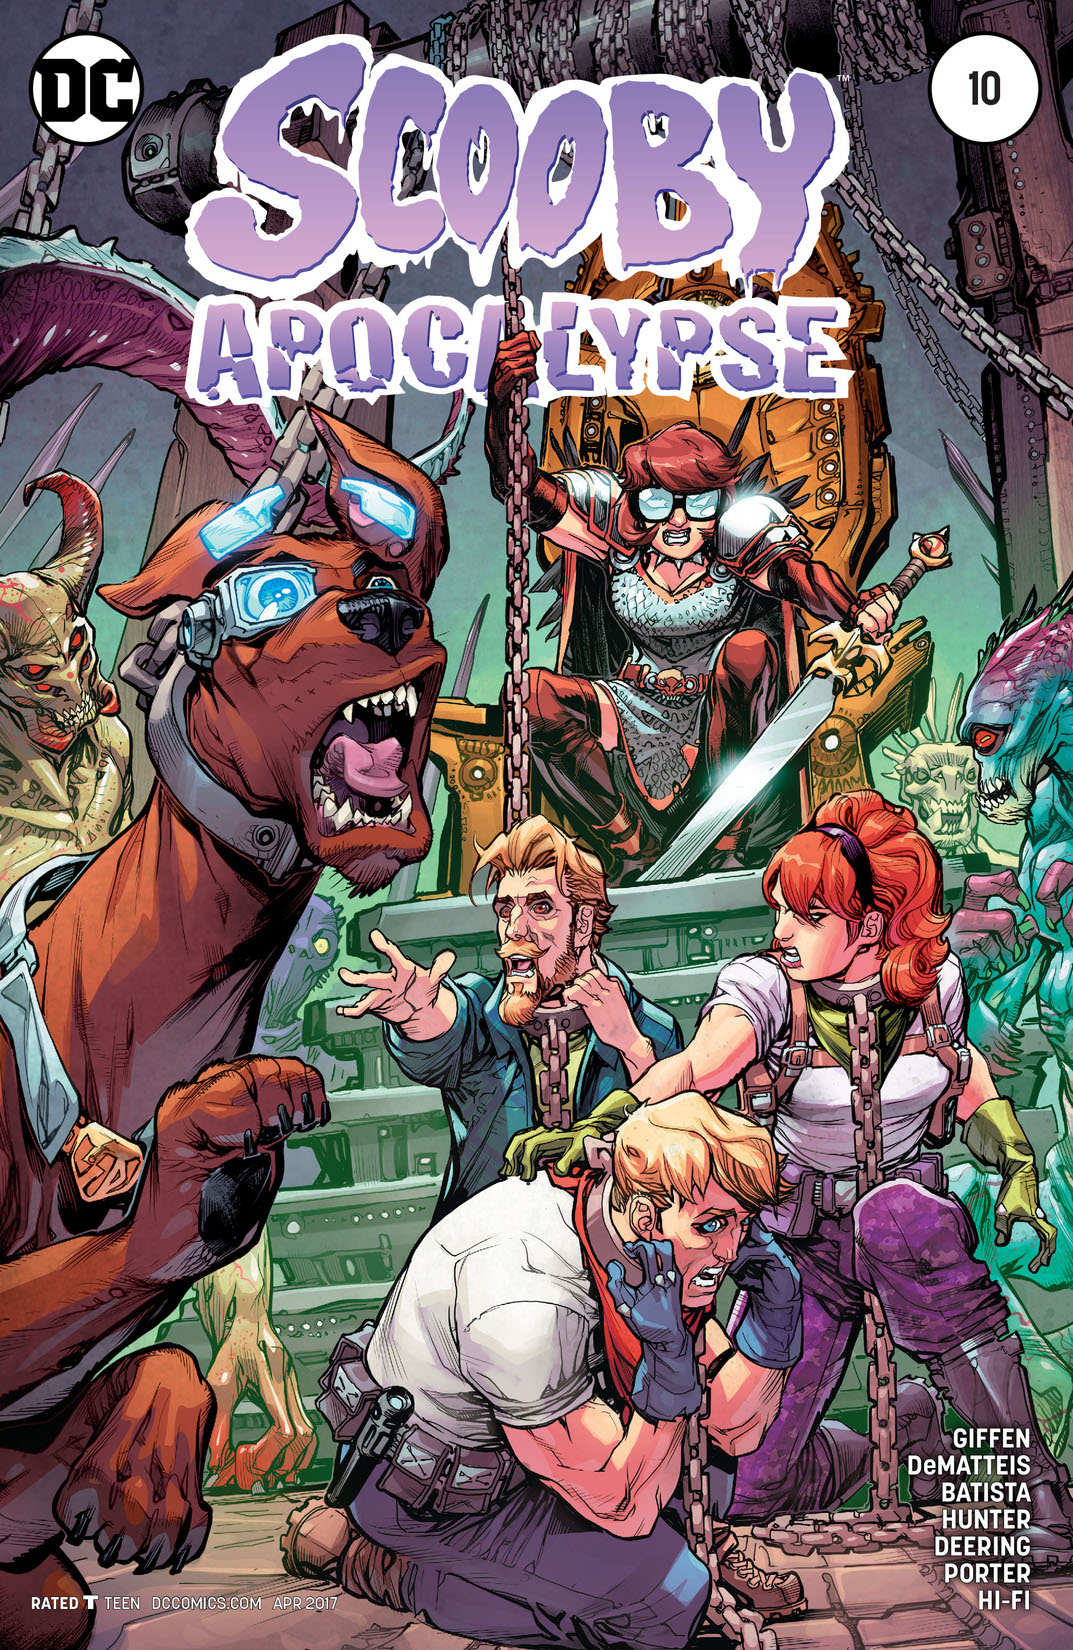 Scooby Apocalypse #10 preview images